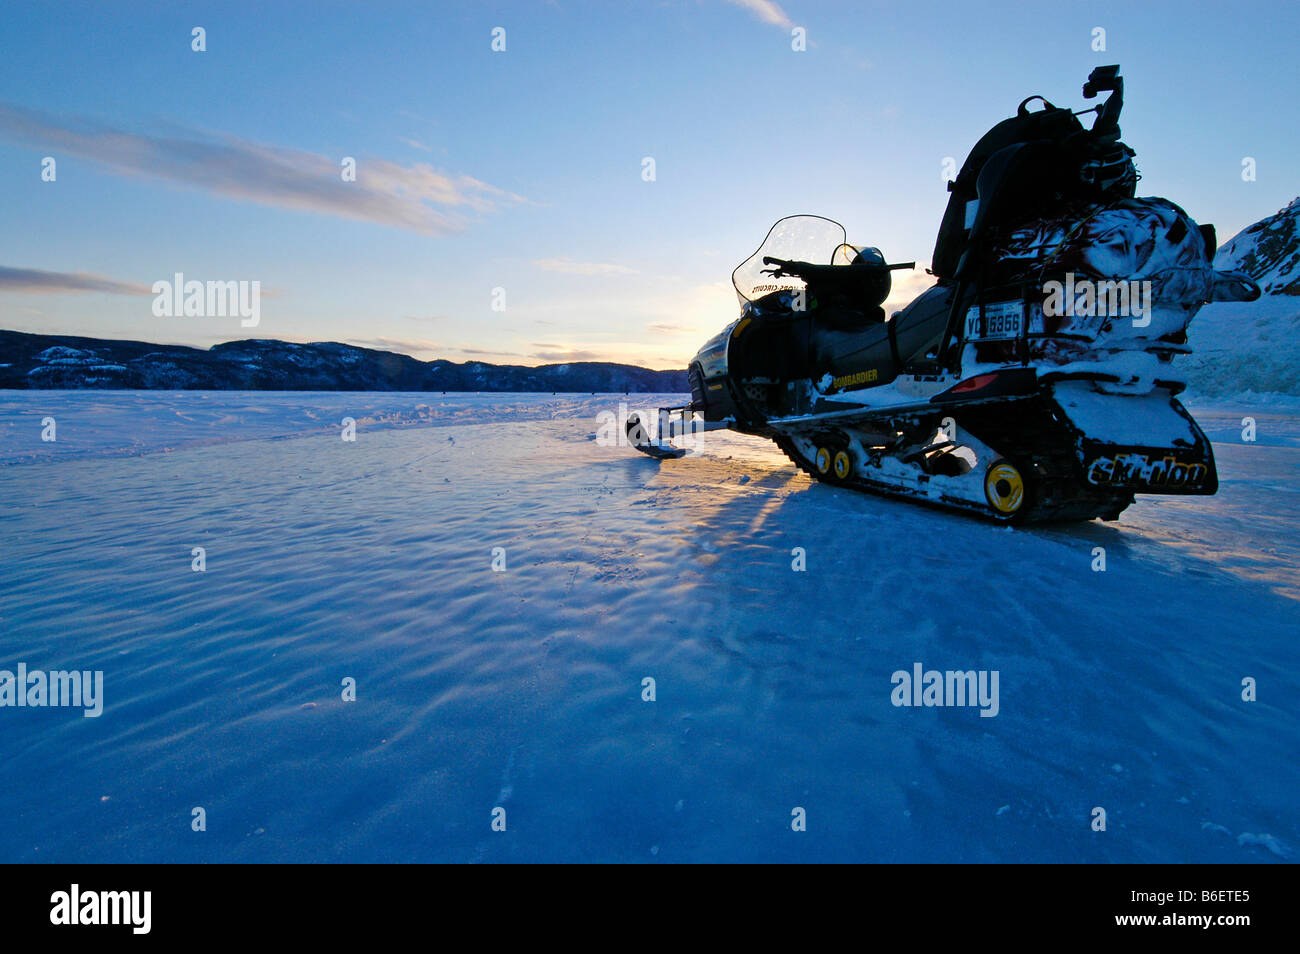 Snowmobile in ice and snow, Saguenay Lac Saint Jean Region, Quebec, Canada, North America Stock Photo